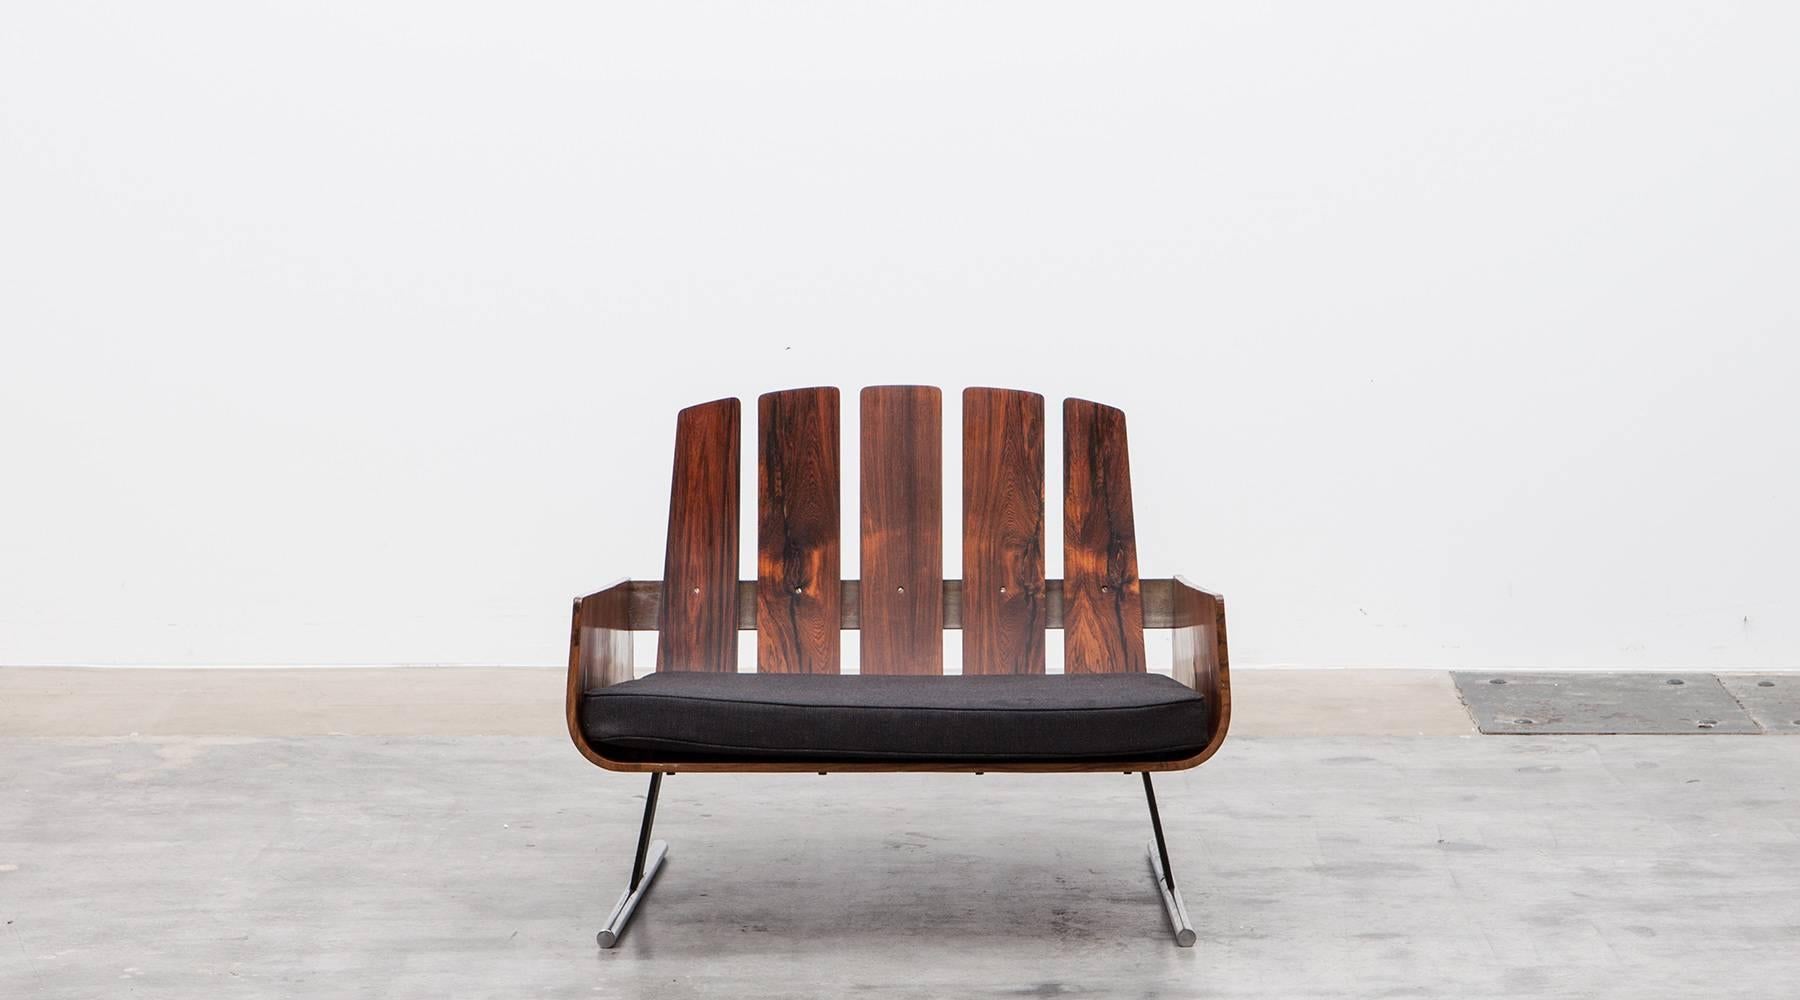 Rare pieces of Brazilian modern design. A pair of lounge chairs with arms are designed by Jorge Zalszupin in the 1960s. Constructed with Brazilian jacaranda with dramatic, contrasted grains. The chairs features beautiful profile from all angles.